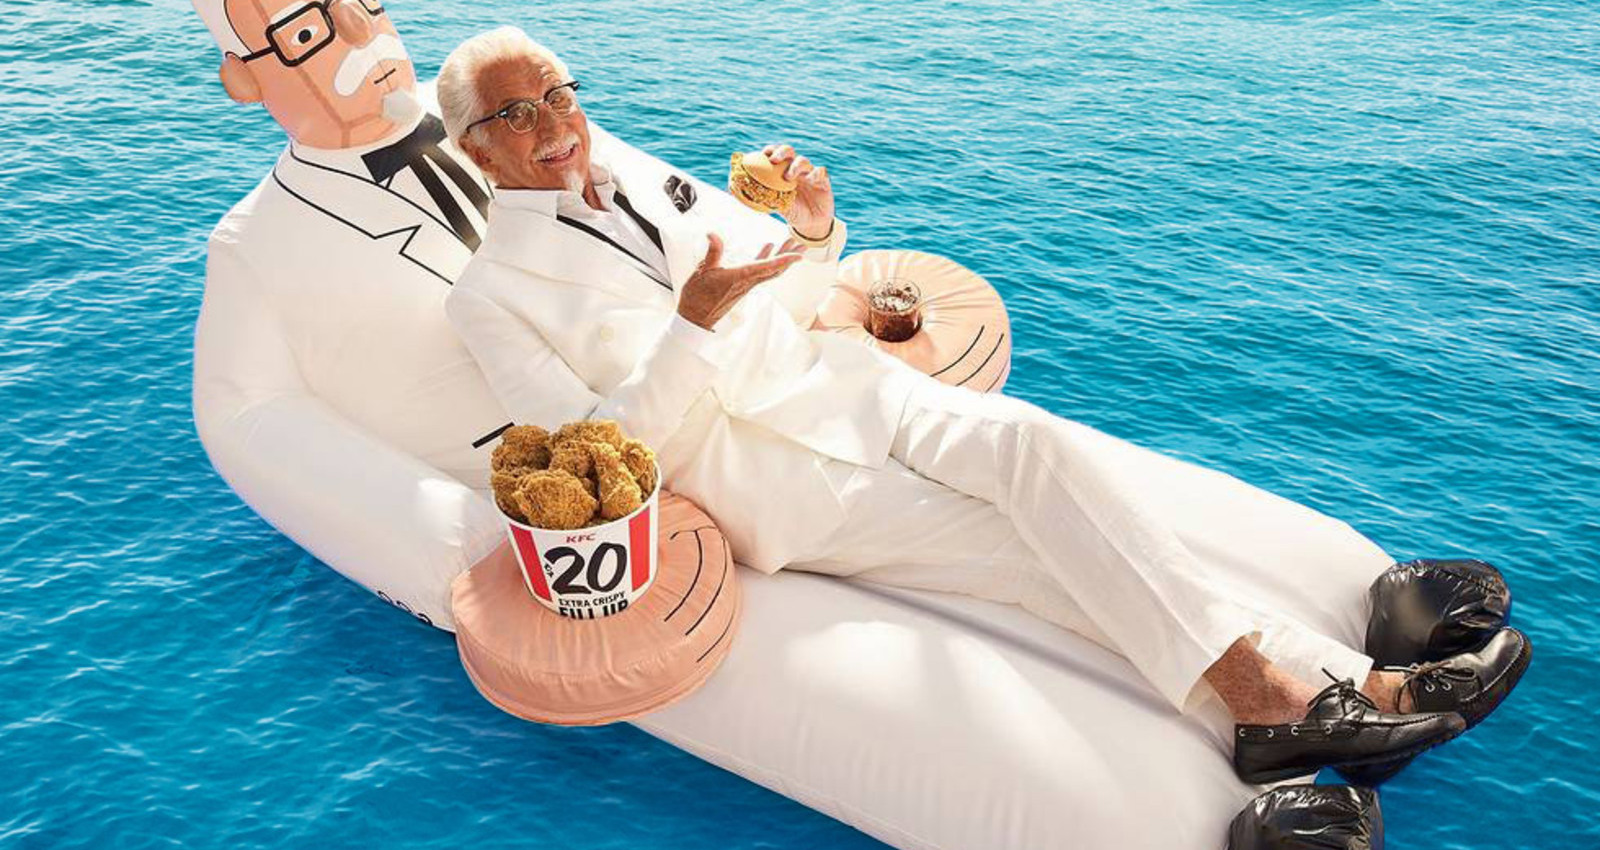 The Return of Colonel Sanders 2018